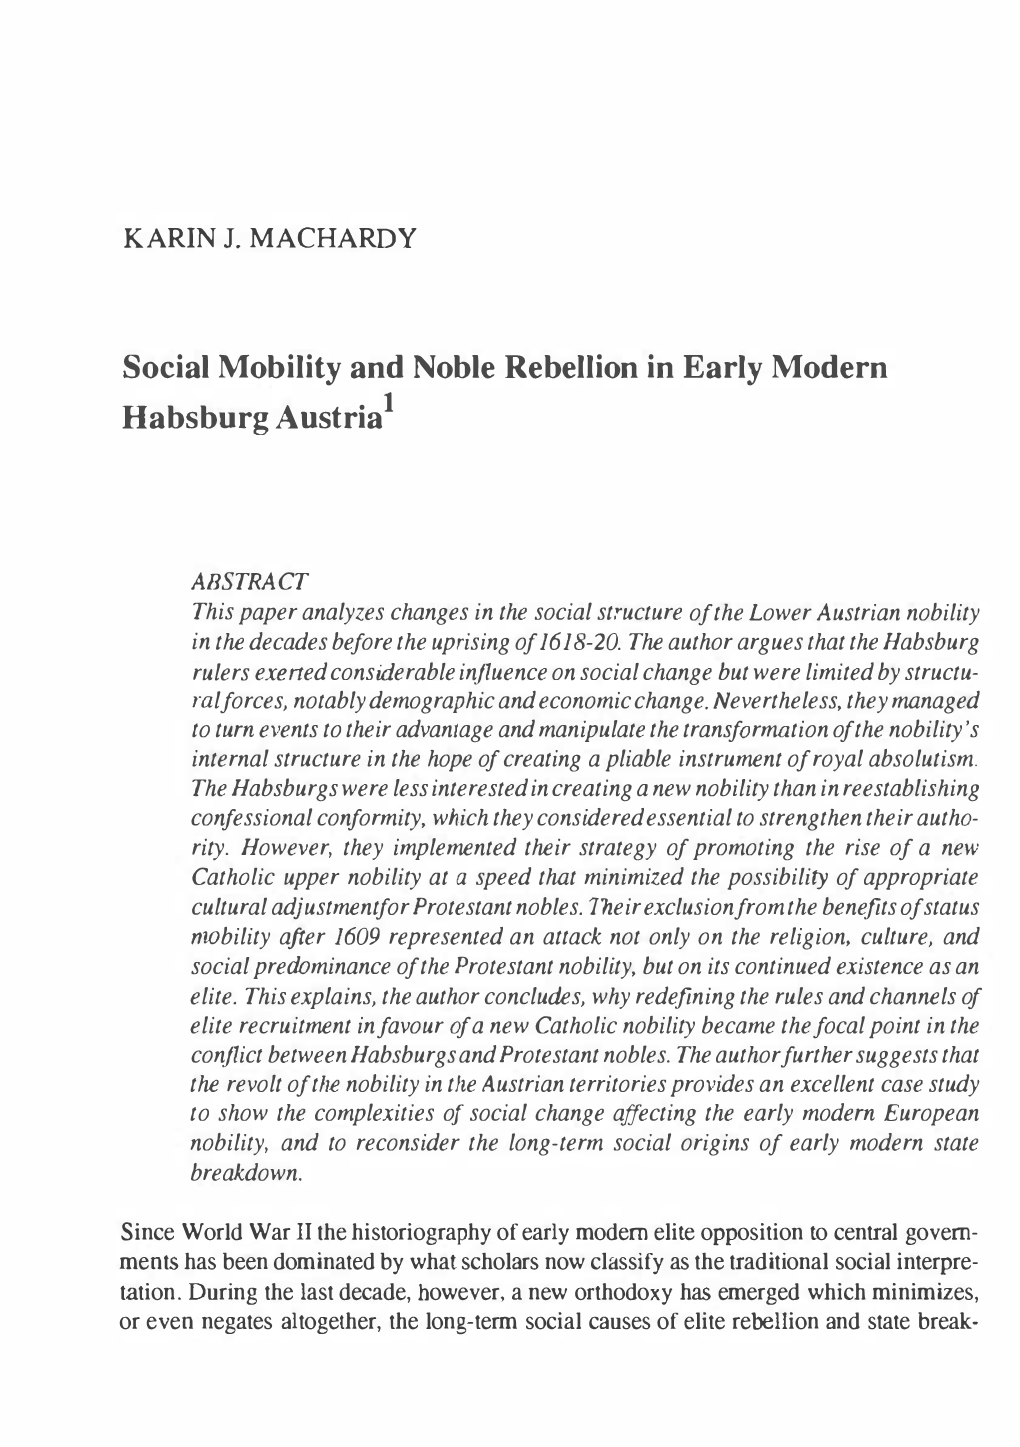 Social Mobility and Noble Rebellion in Early Modern Habsburg Austria1